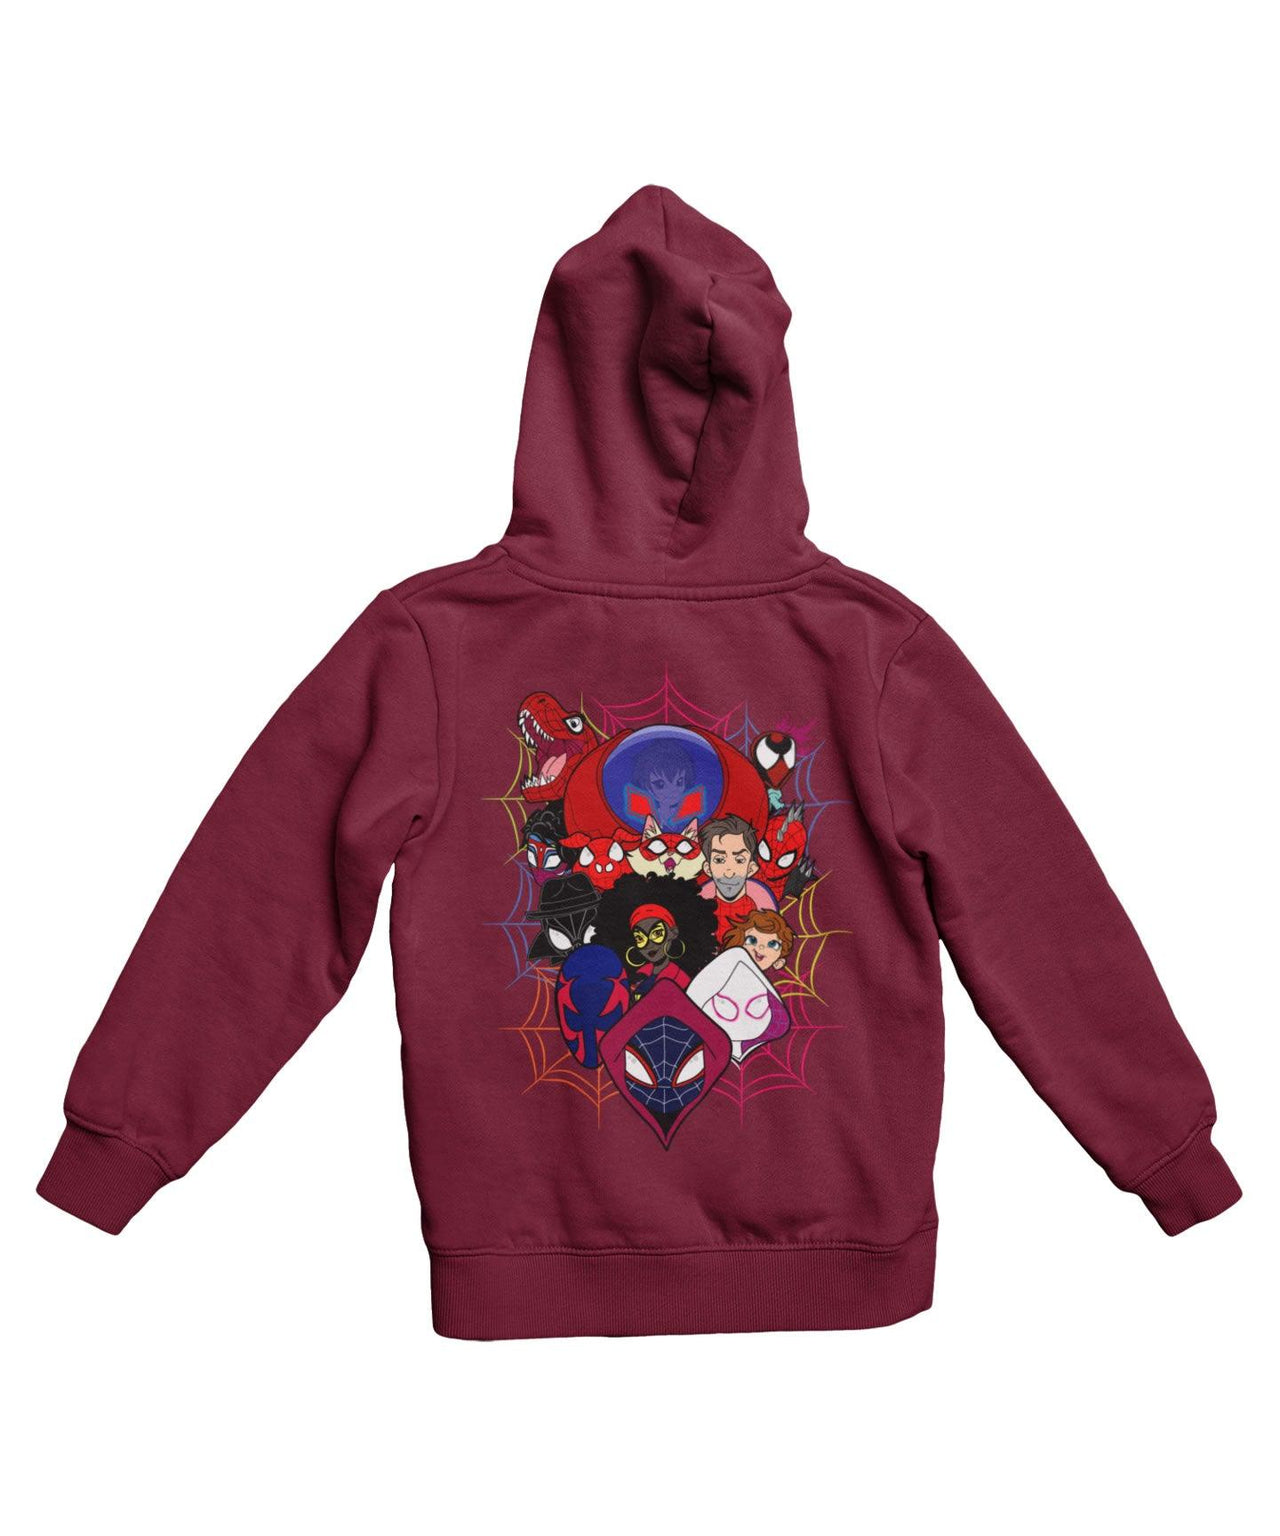 Top Notchy Spiderverse Explosion Back Printed Unisex Hoodie 8Ball